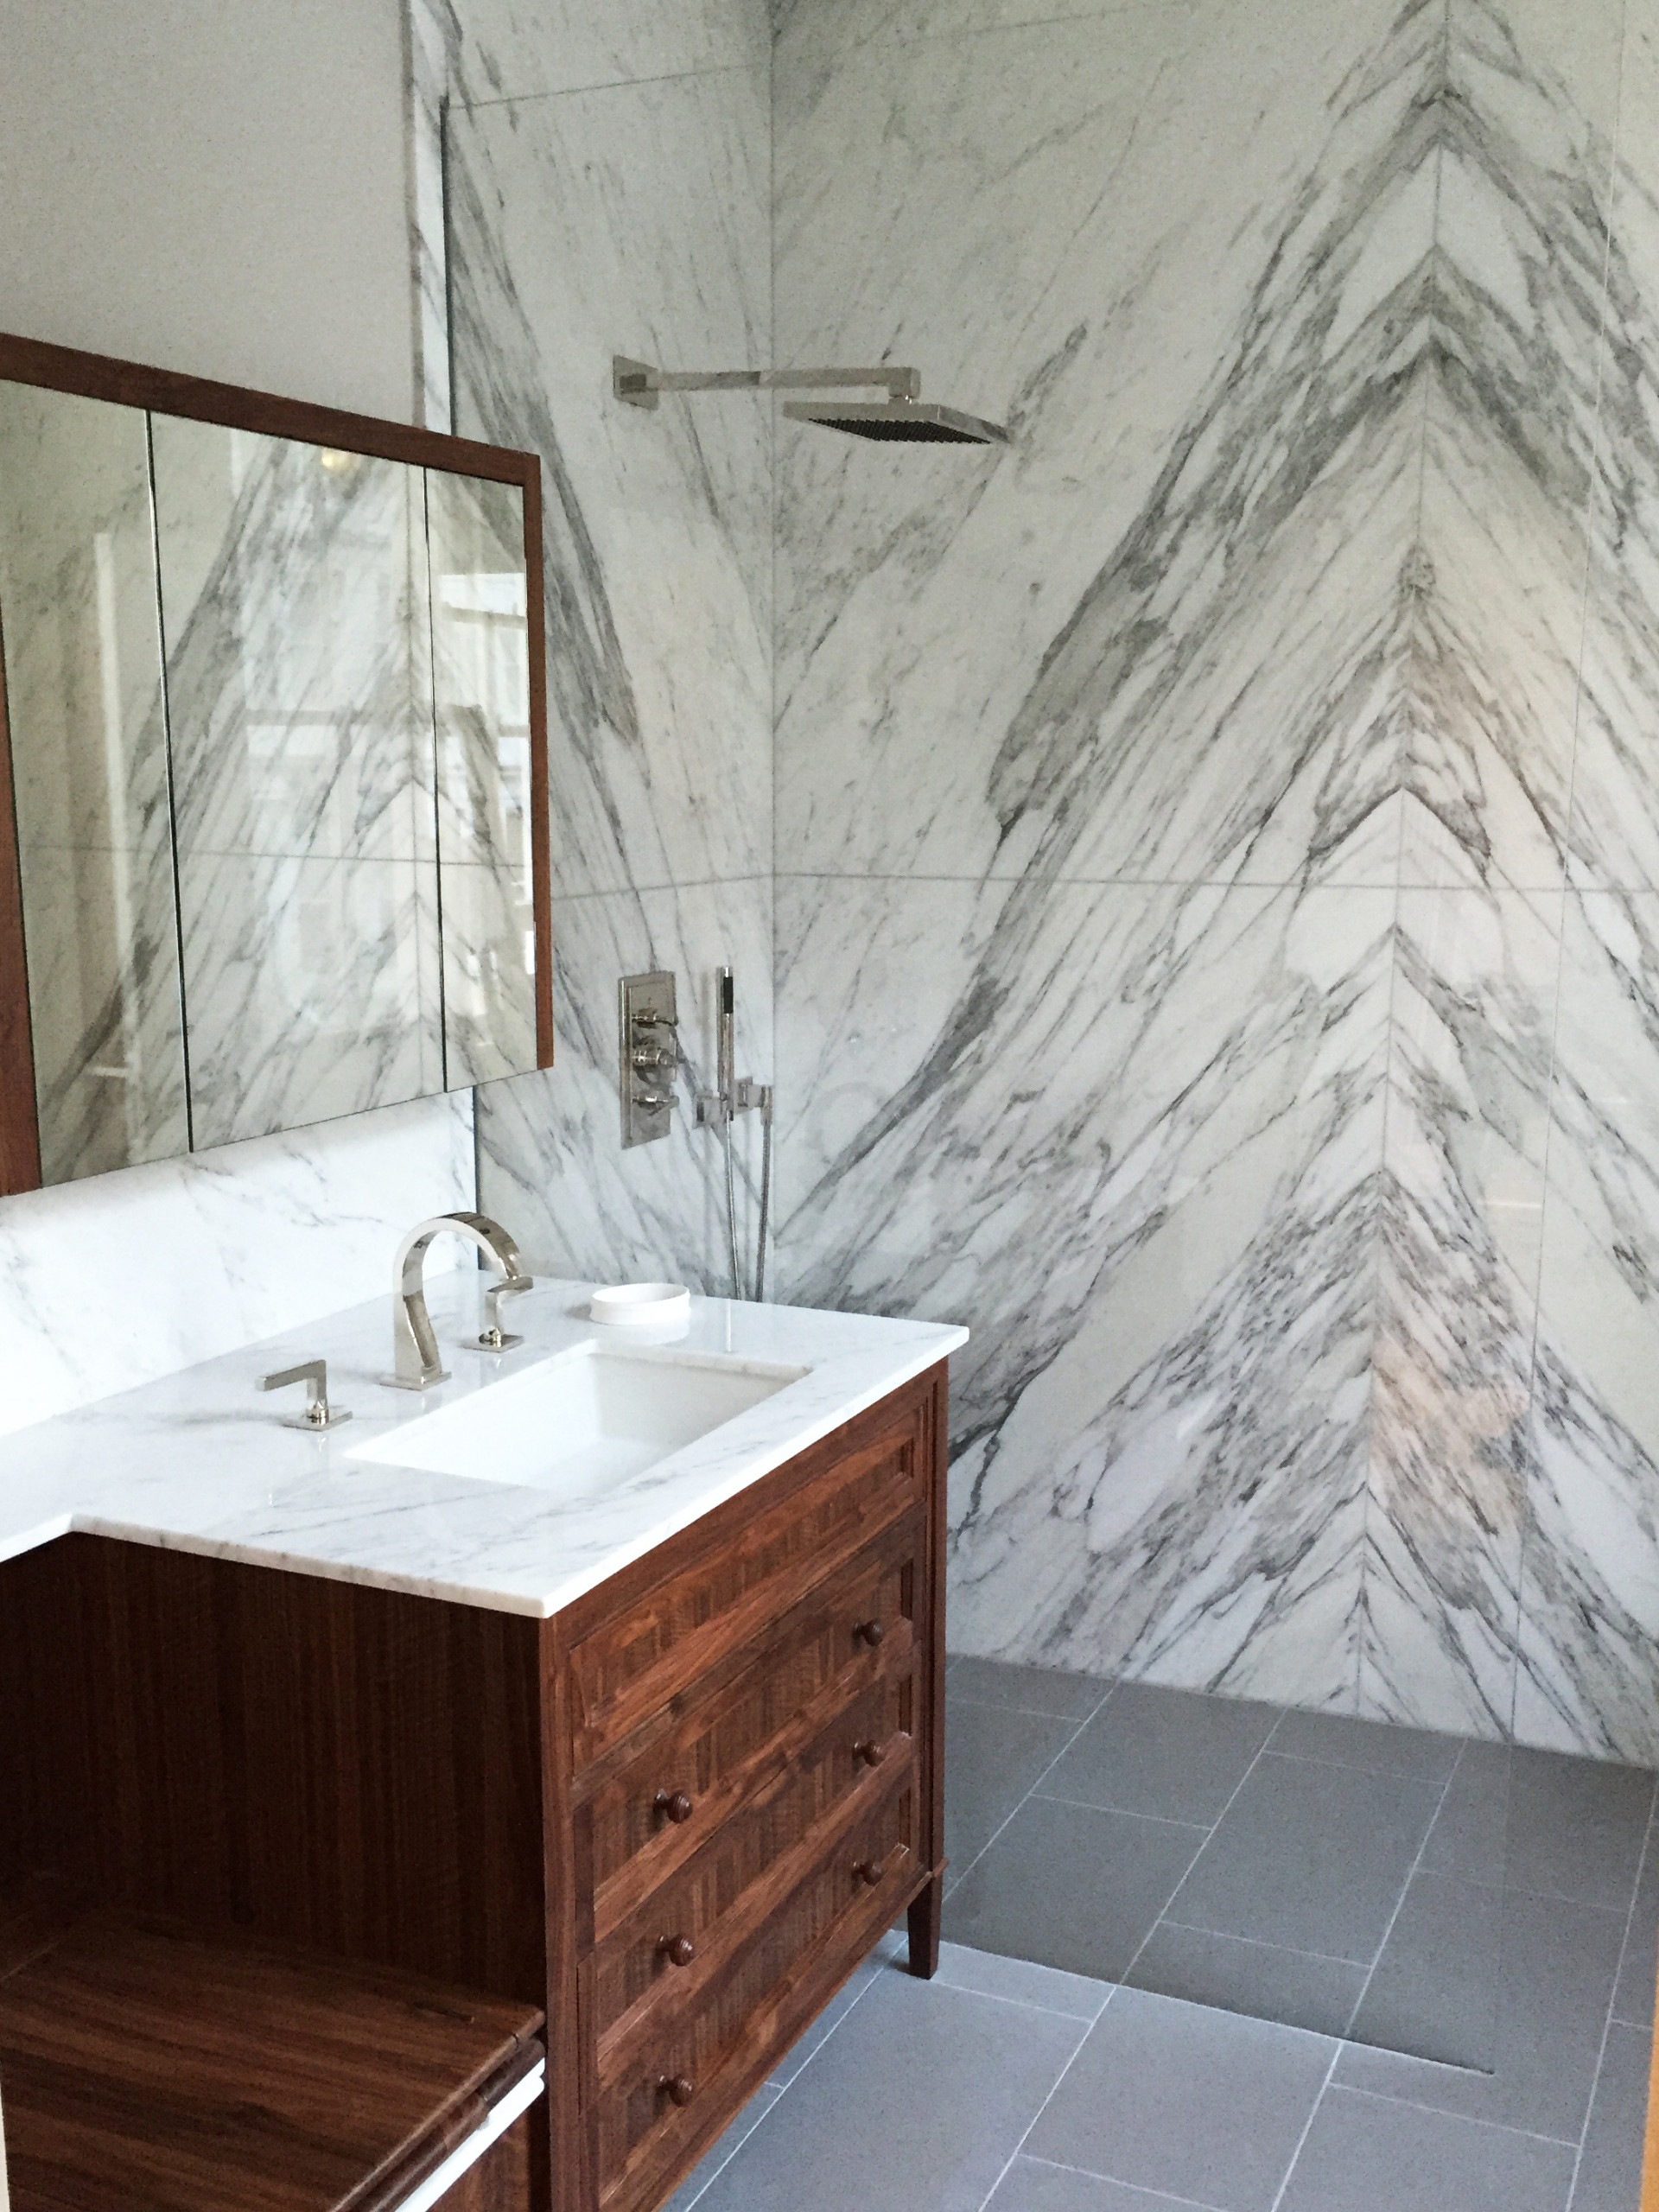 Amazing shower room, featuring an amazing loo seat & Calacatta marble